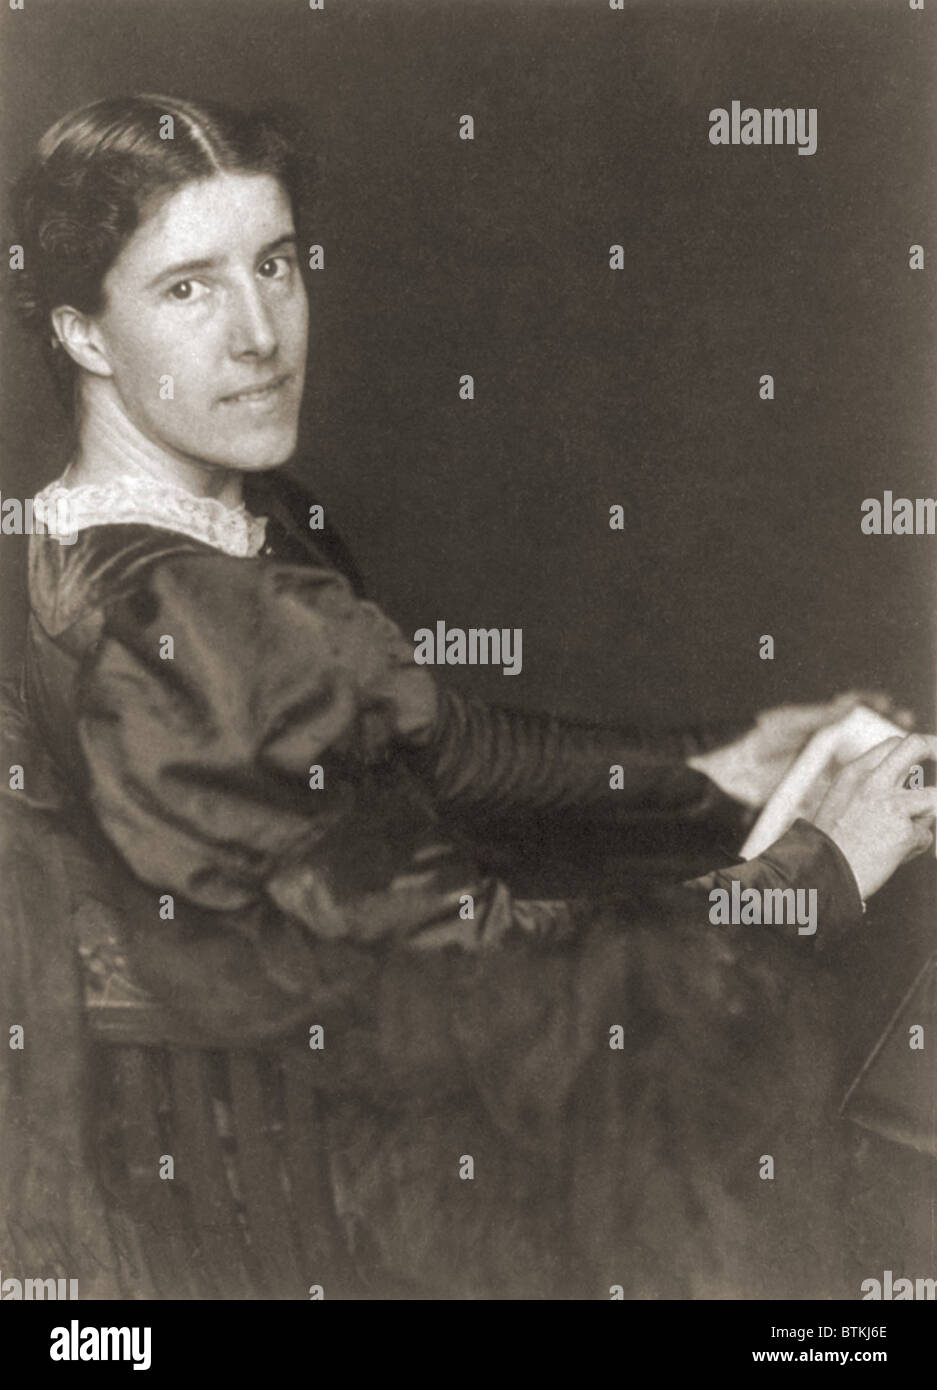 Charlote Perkins Gilman (1860-1935), American writer established a theoretic foundation for 20th century feminism and the woman's rights movement. Stock Photo